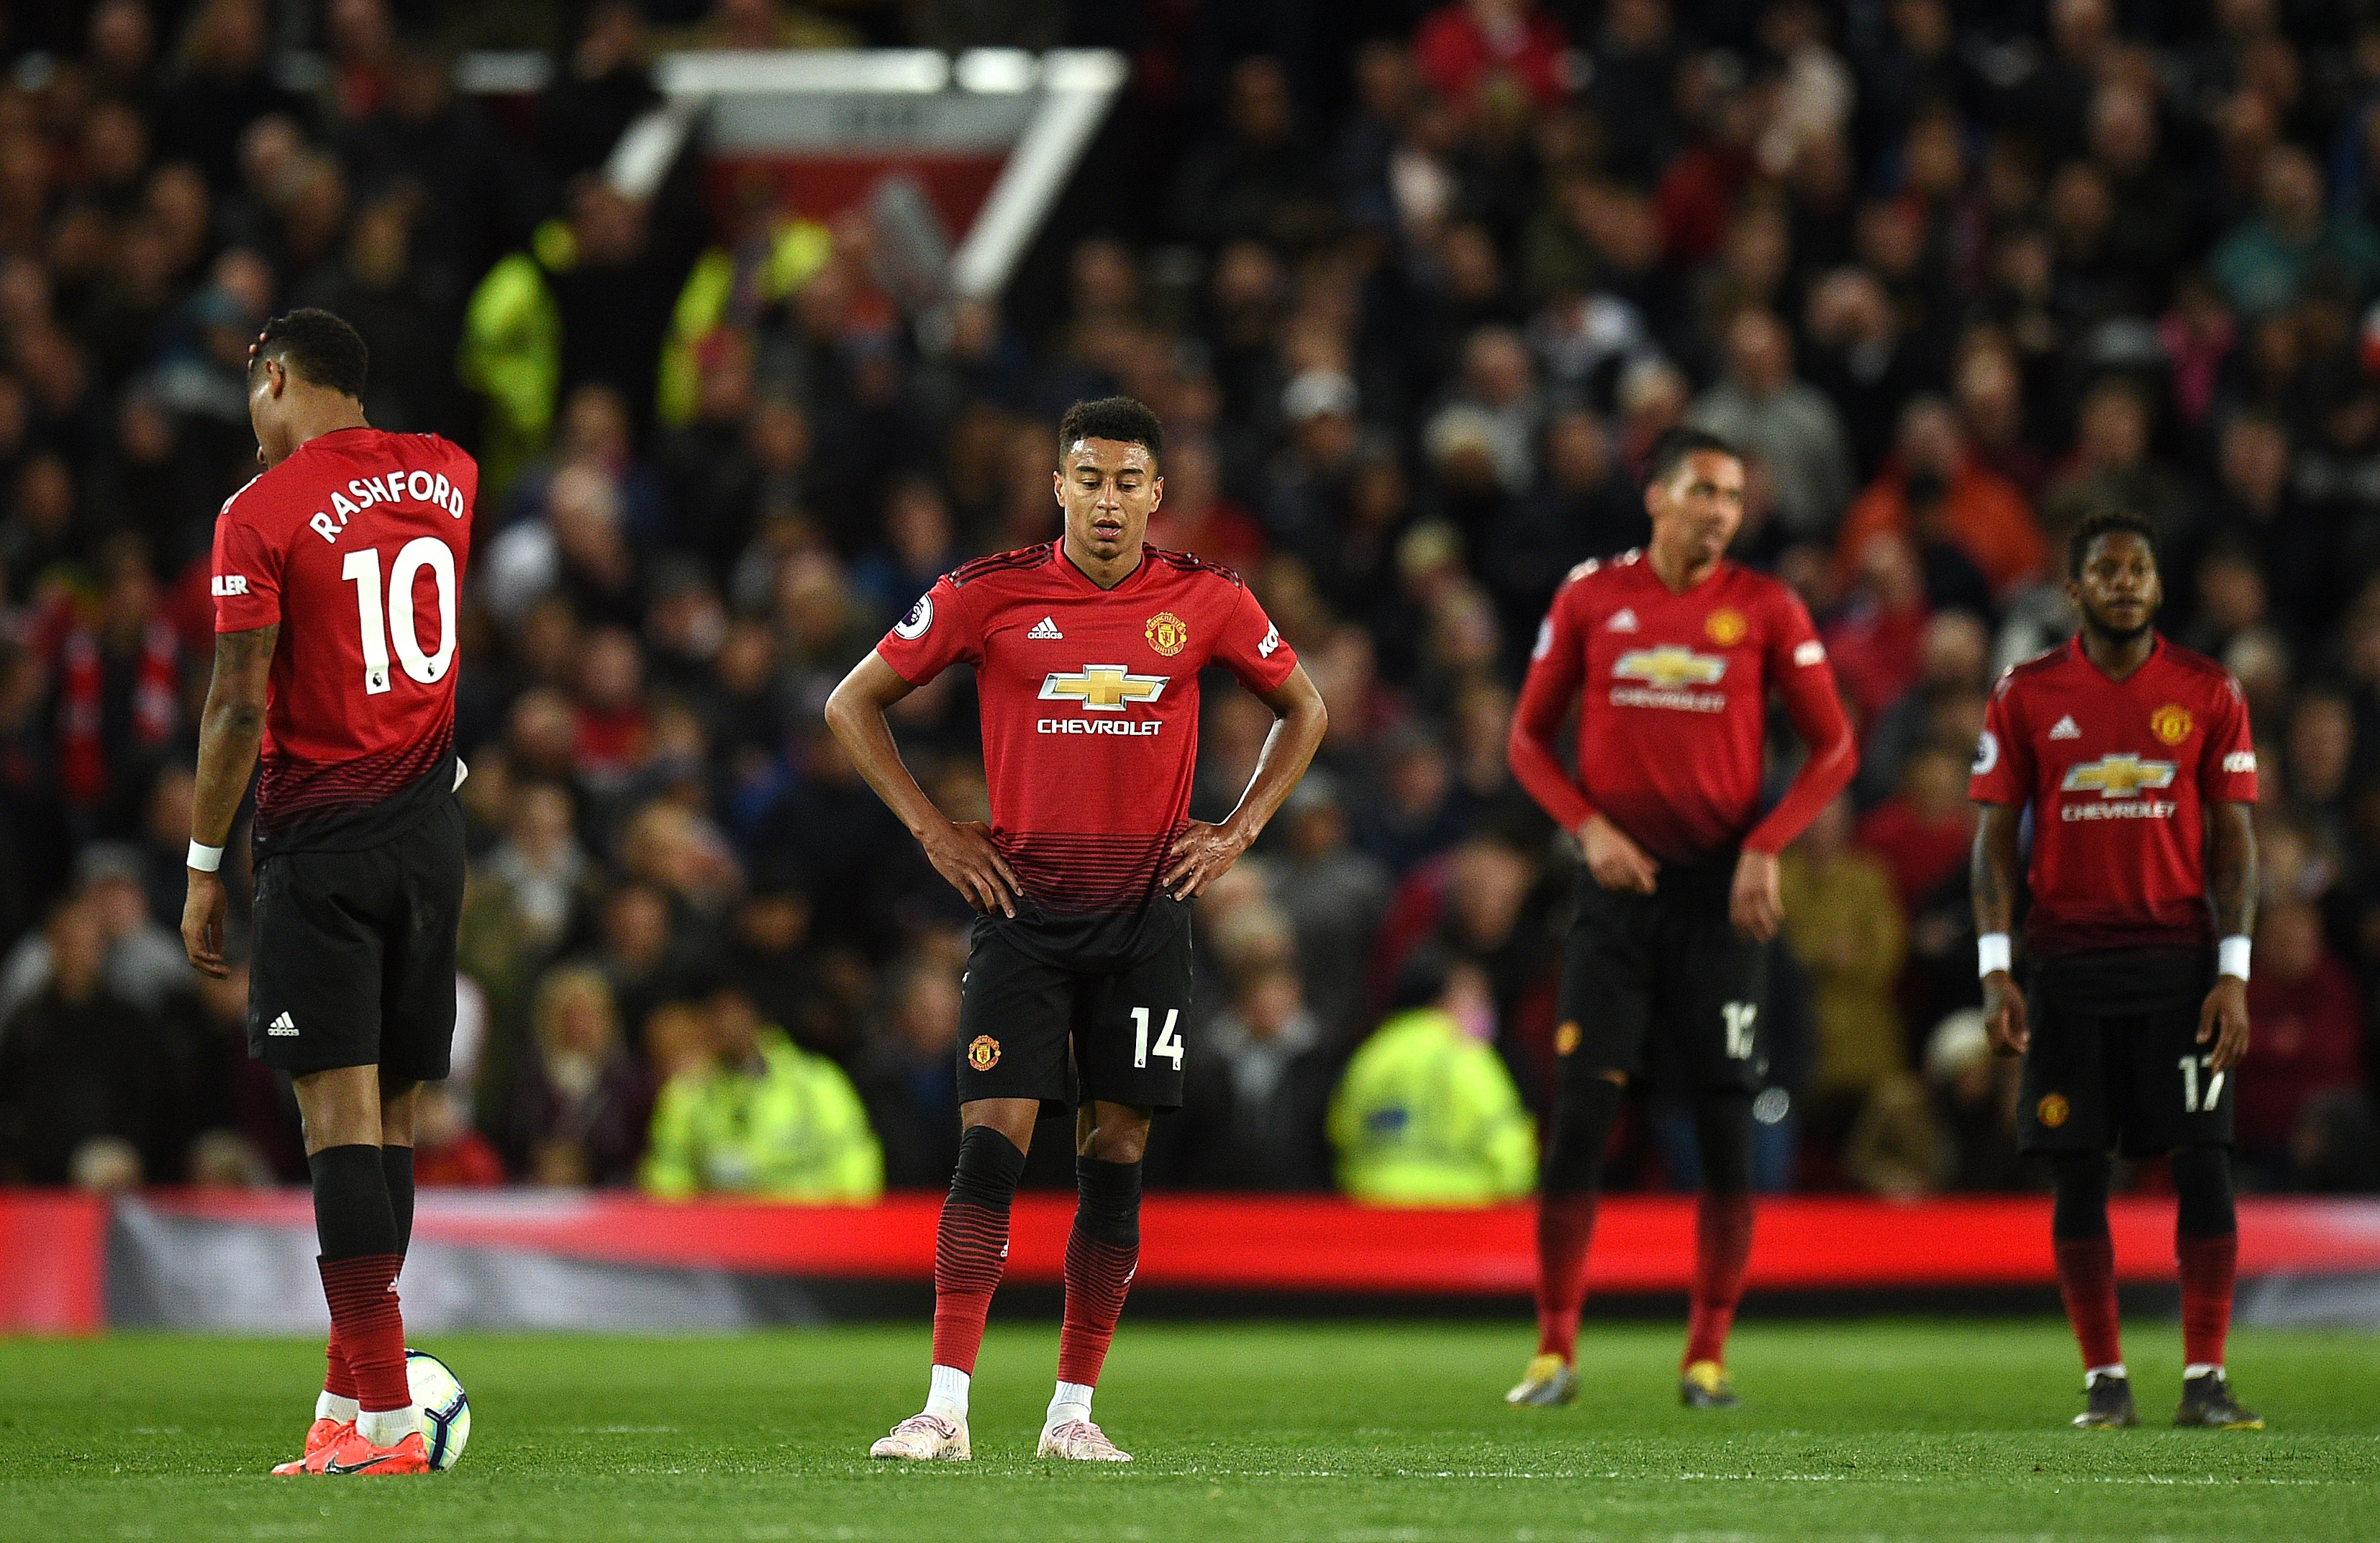 Manchester United's English forward Marcus Rashford (L), Manchester United's English midfielder Jesse Lingard (2L), Manchester United's English defender Chris Smalling (2R) and Manchester United's Brazilian midfielder Fred react after conceding a goal during the English Premier League football match between Manchester United and Manchester City at Old Trafford in Manchester, north west England, on April 24, 2019. (Photo by Oli SCARFF / AFP) / RESTRICTED TO EDITORIAL USE. No use with unauthorized audio, video, data, fixture lists, club/league logos or 'live' services. Online in-match use limited to 120 images. An additional 40 images may be used in extra time. No video emulation. Social media in-match use limited to 120 images. An additional 40 images may be used in extra time. No use in betting publications, games or single club/league/player publications. /         (Photo credit should read OLI SCARFF/AFP/Getty Images)